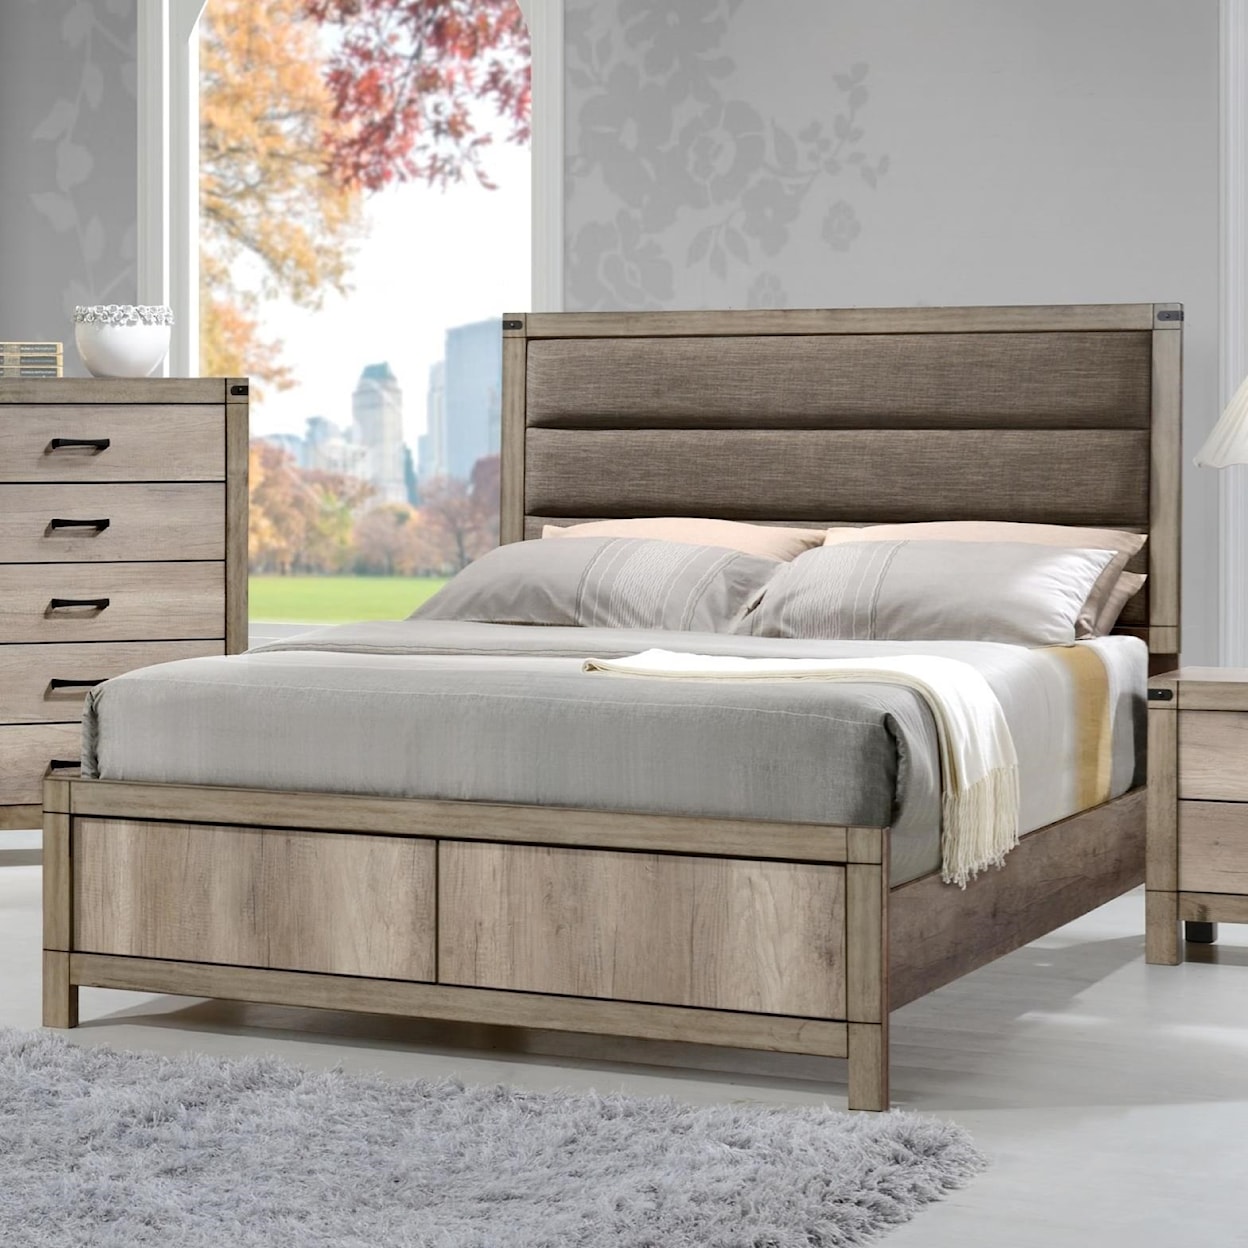 CM Matteo Twin Low Profile Bed